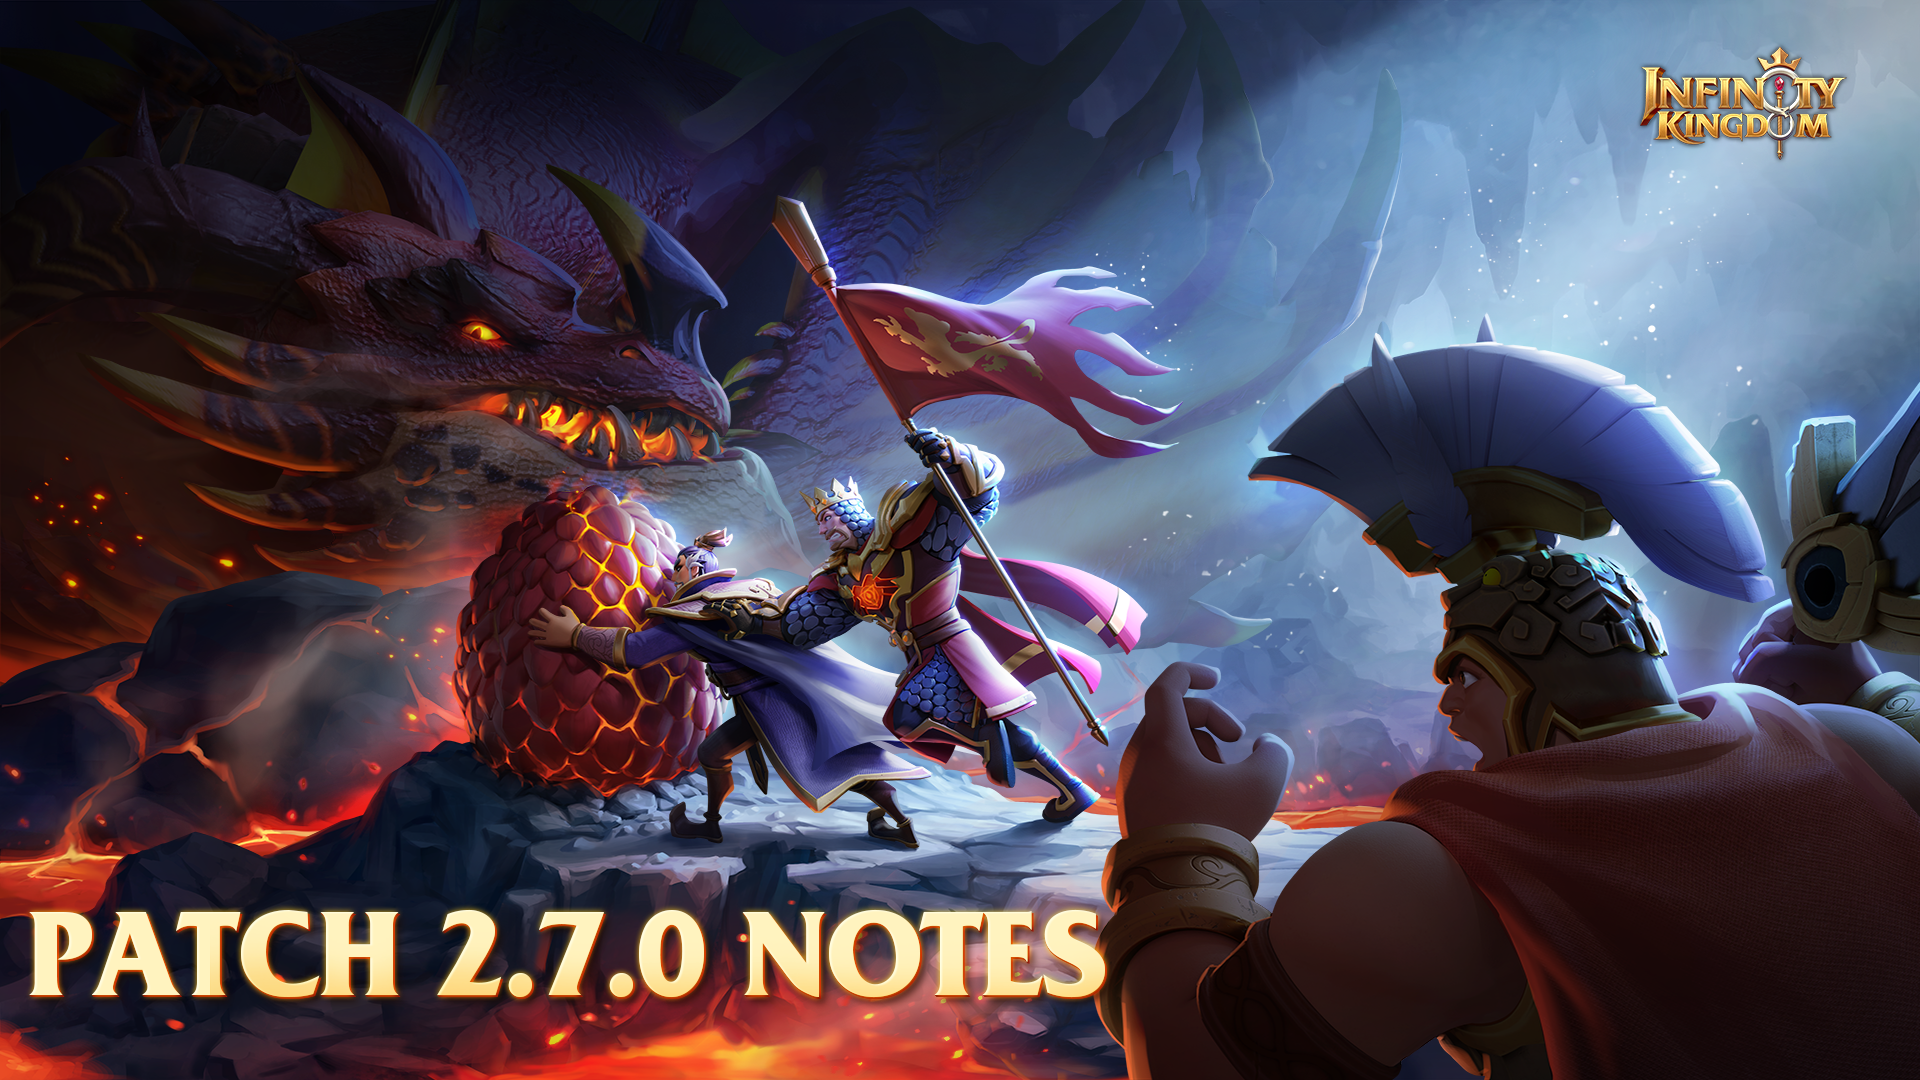 Patch 2.7.0 Notes